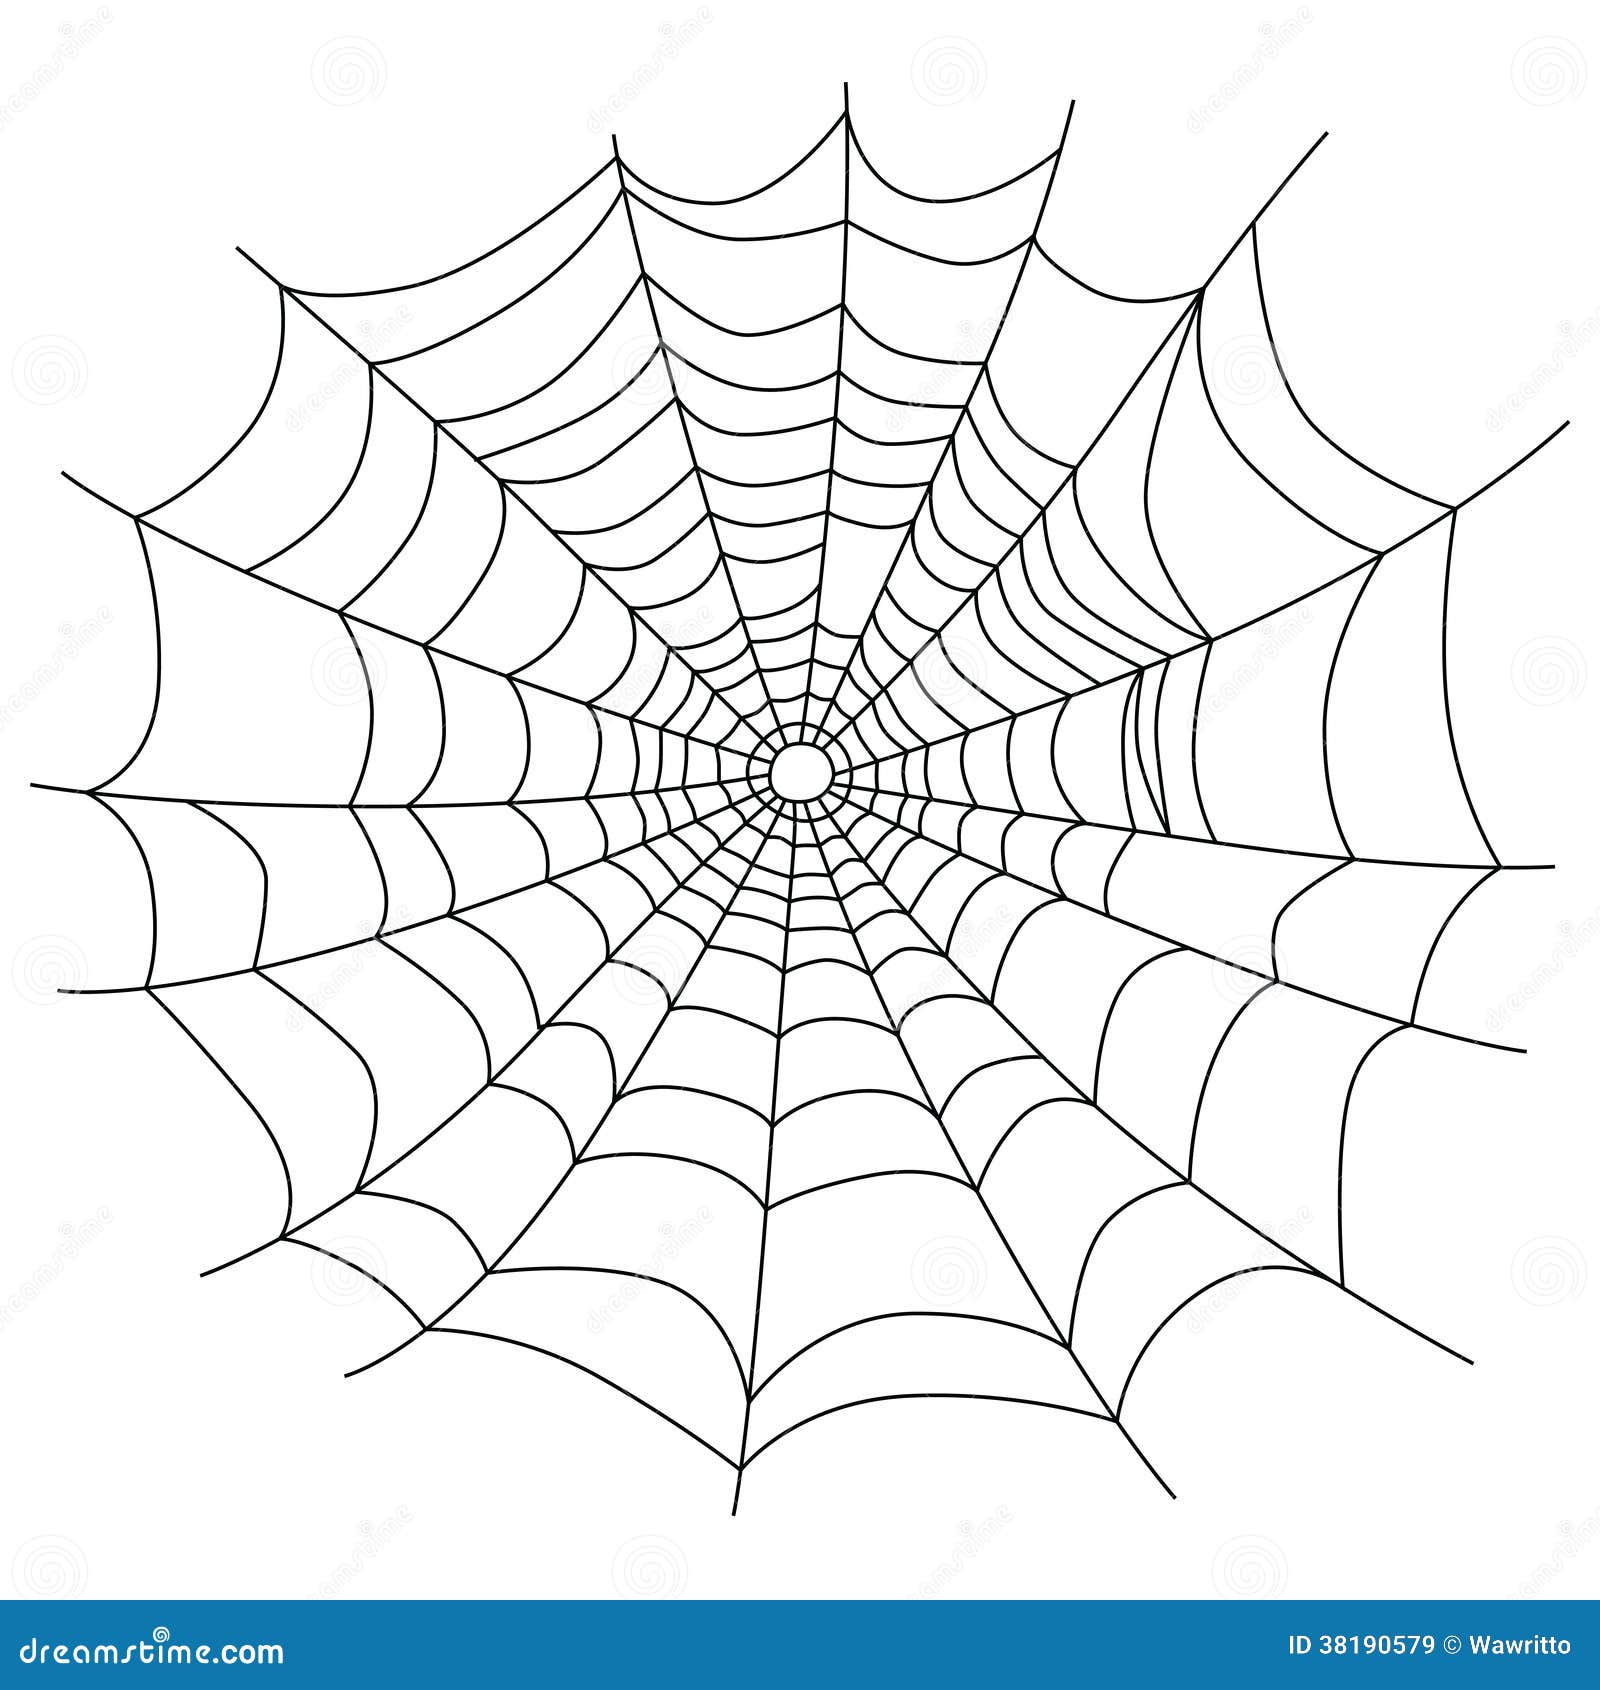 Spider Web Isolated On White, Royalty Free Stock Images - Image: 38190579